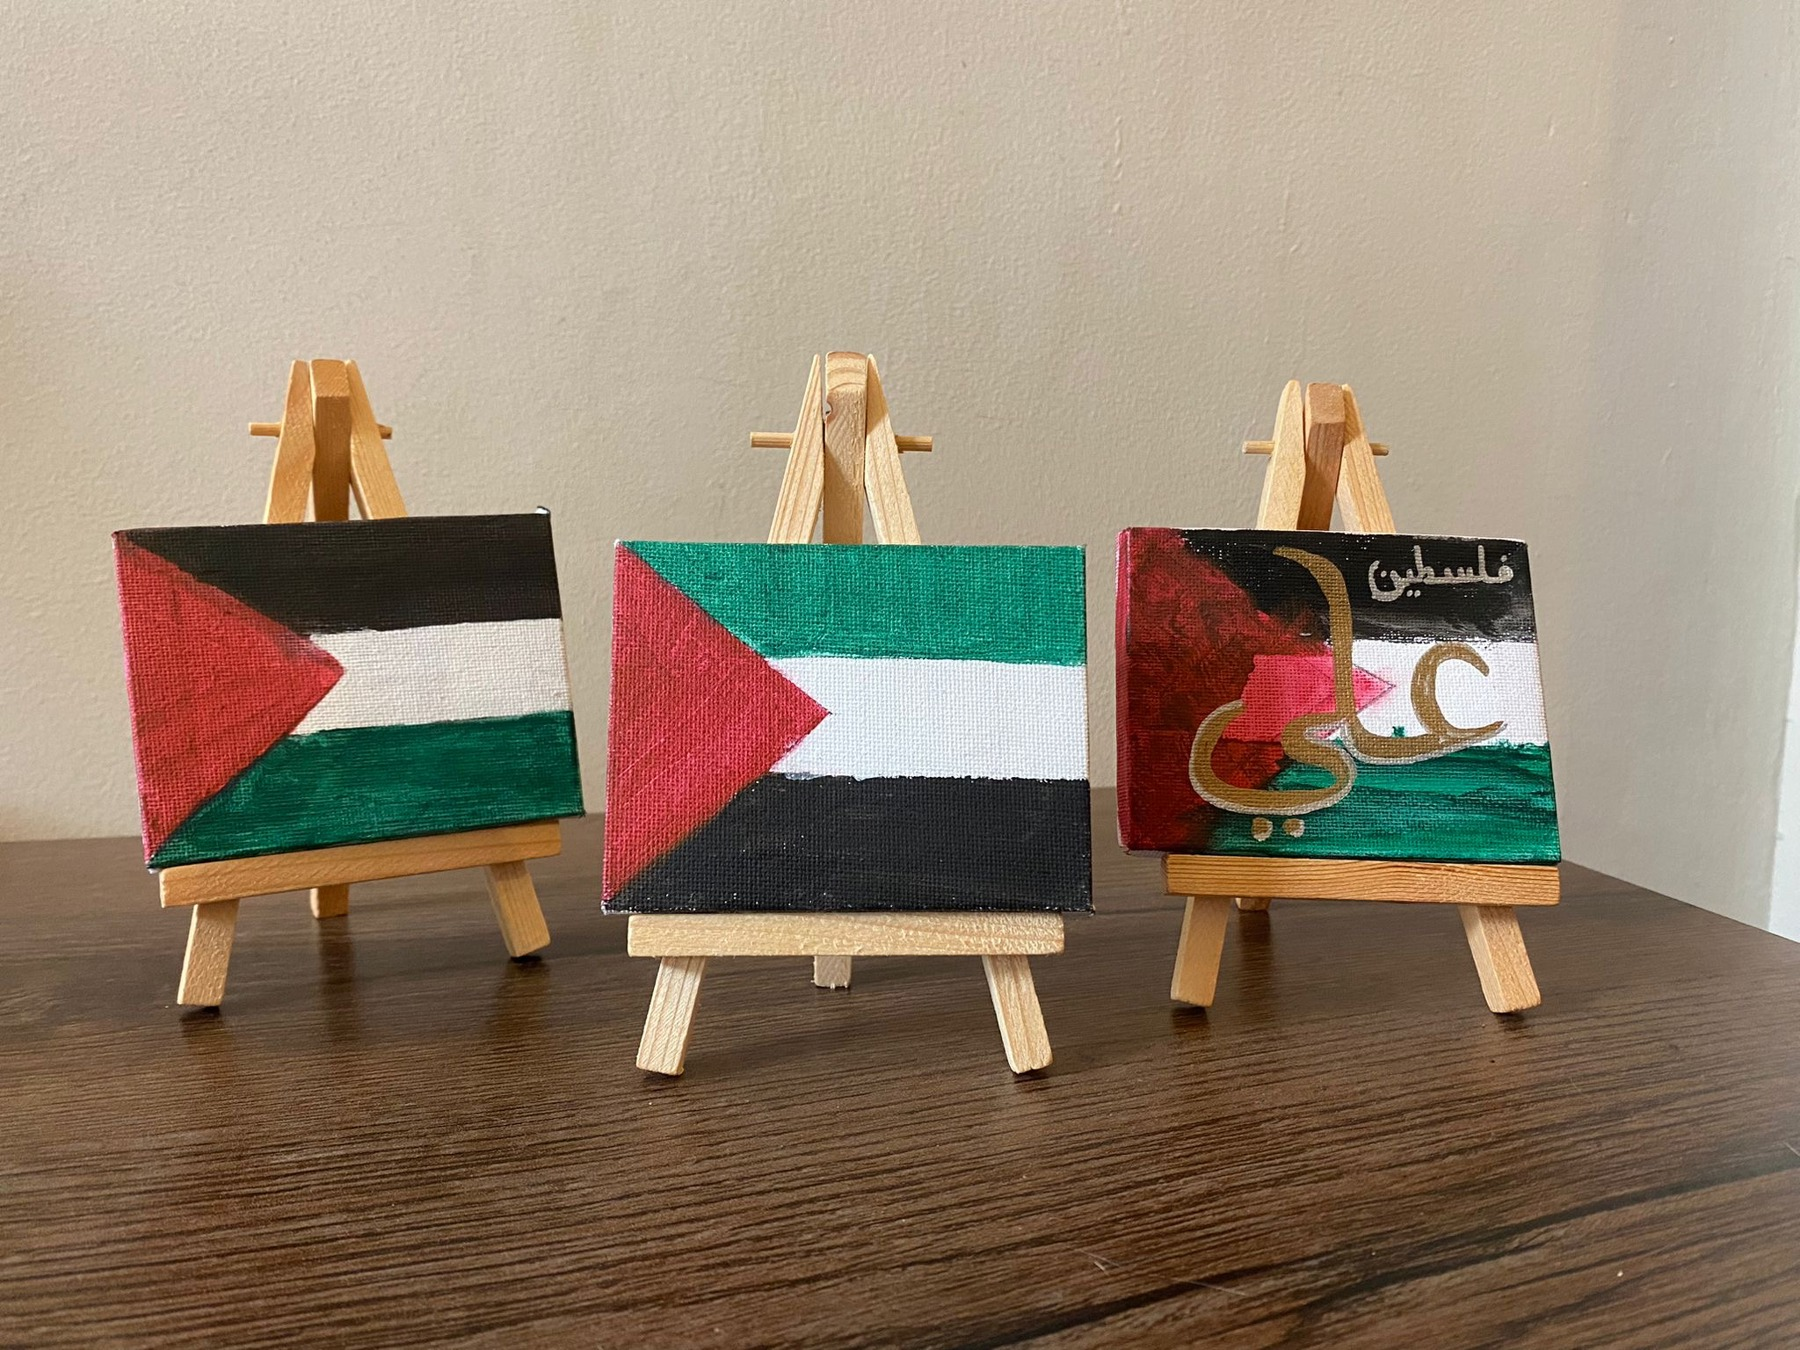 The image shows Palestine flags painted on small canvases on wooden stands. There are three in total on top of a wooden table in front of a wall.